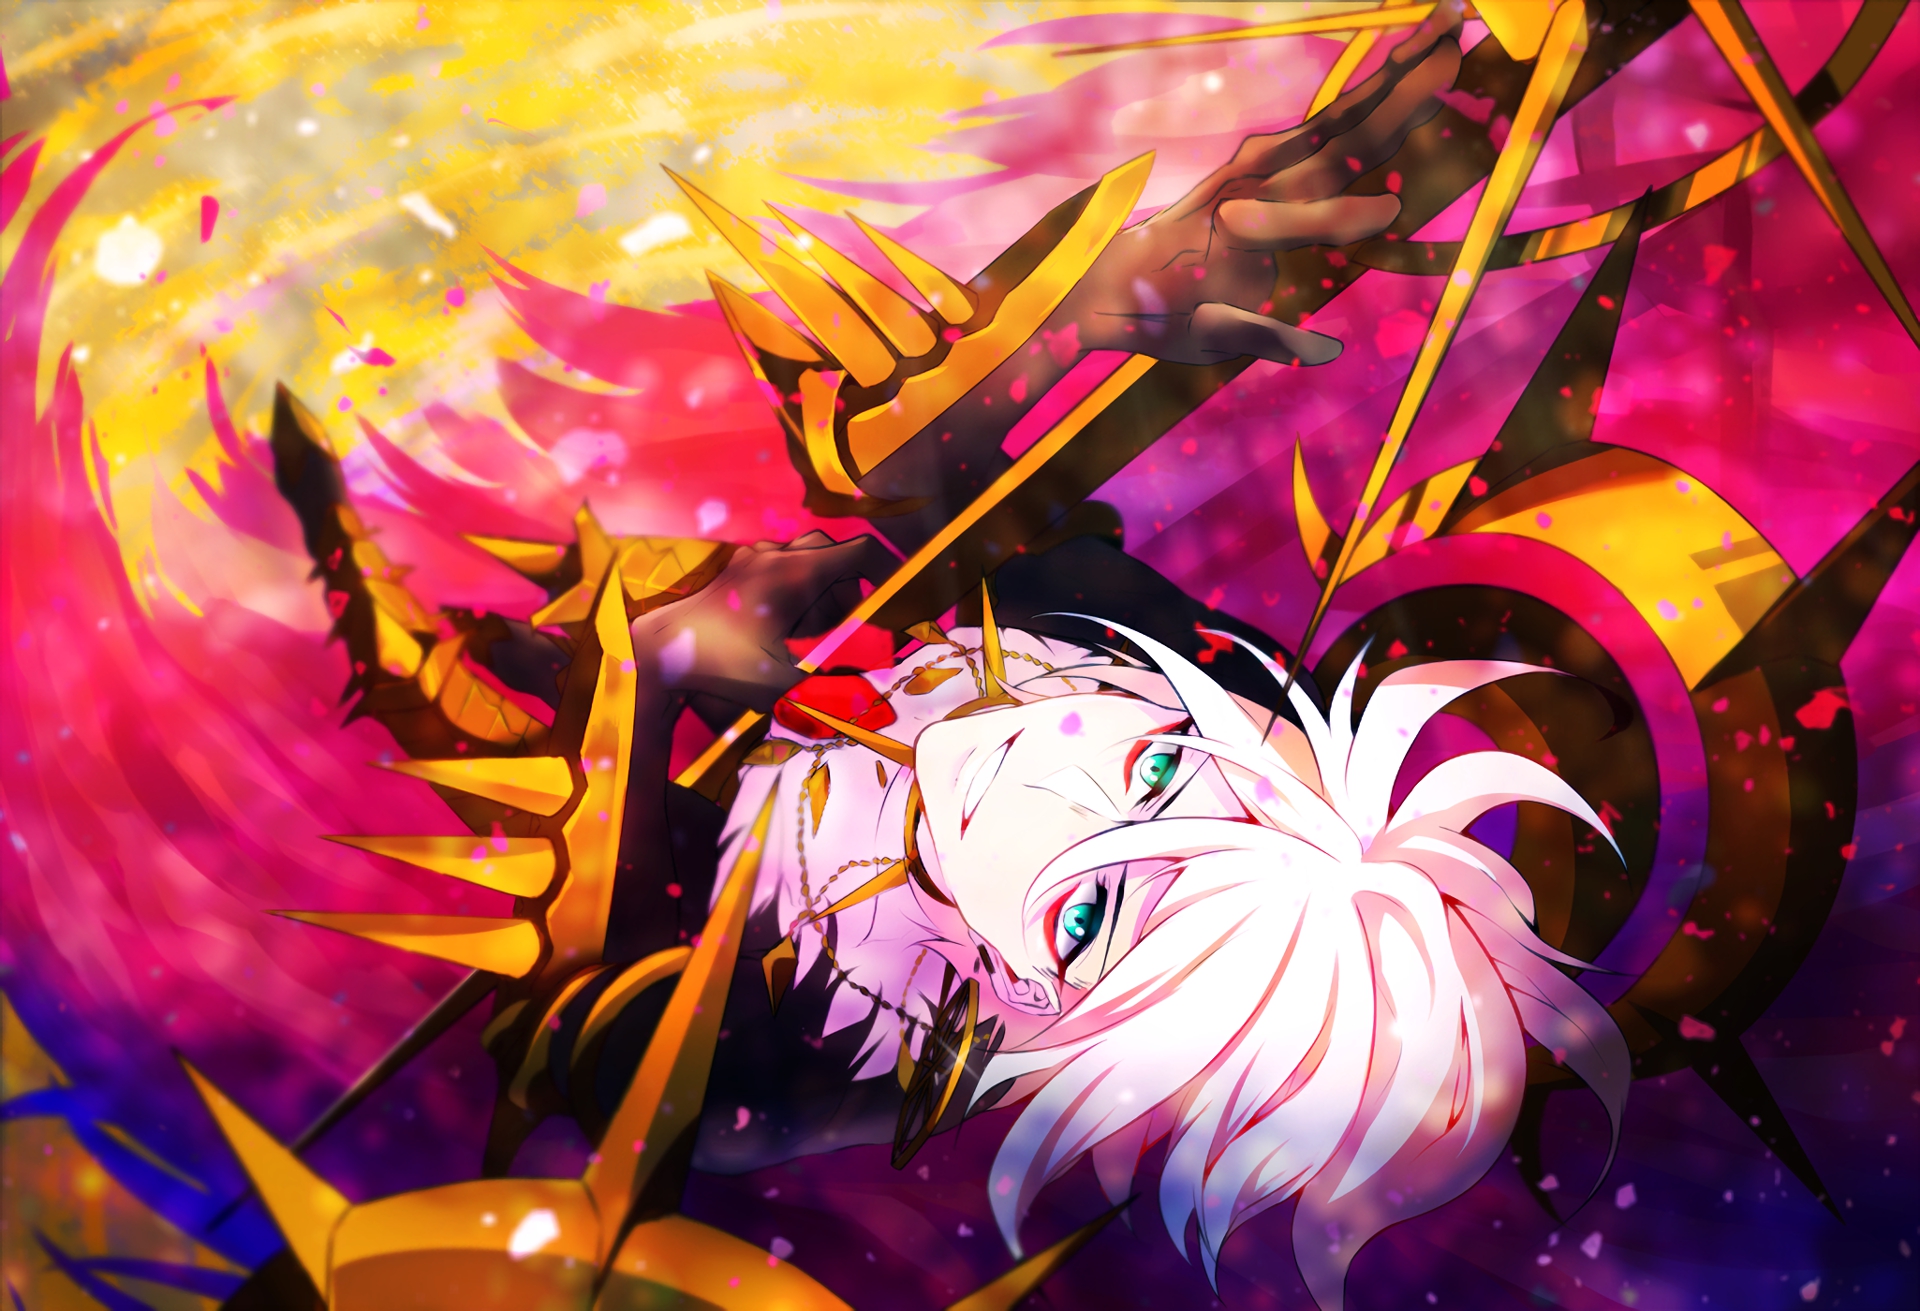 Lancer Of Red Fate Apocrypha 1920x1311